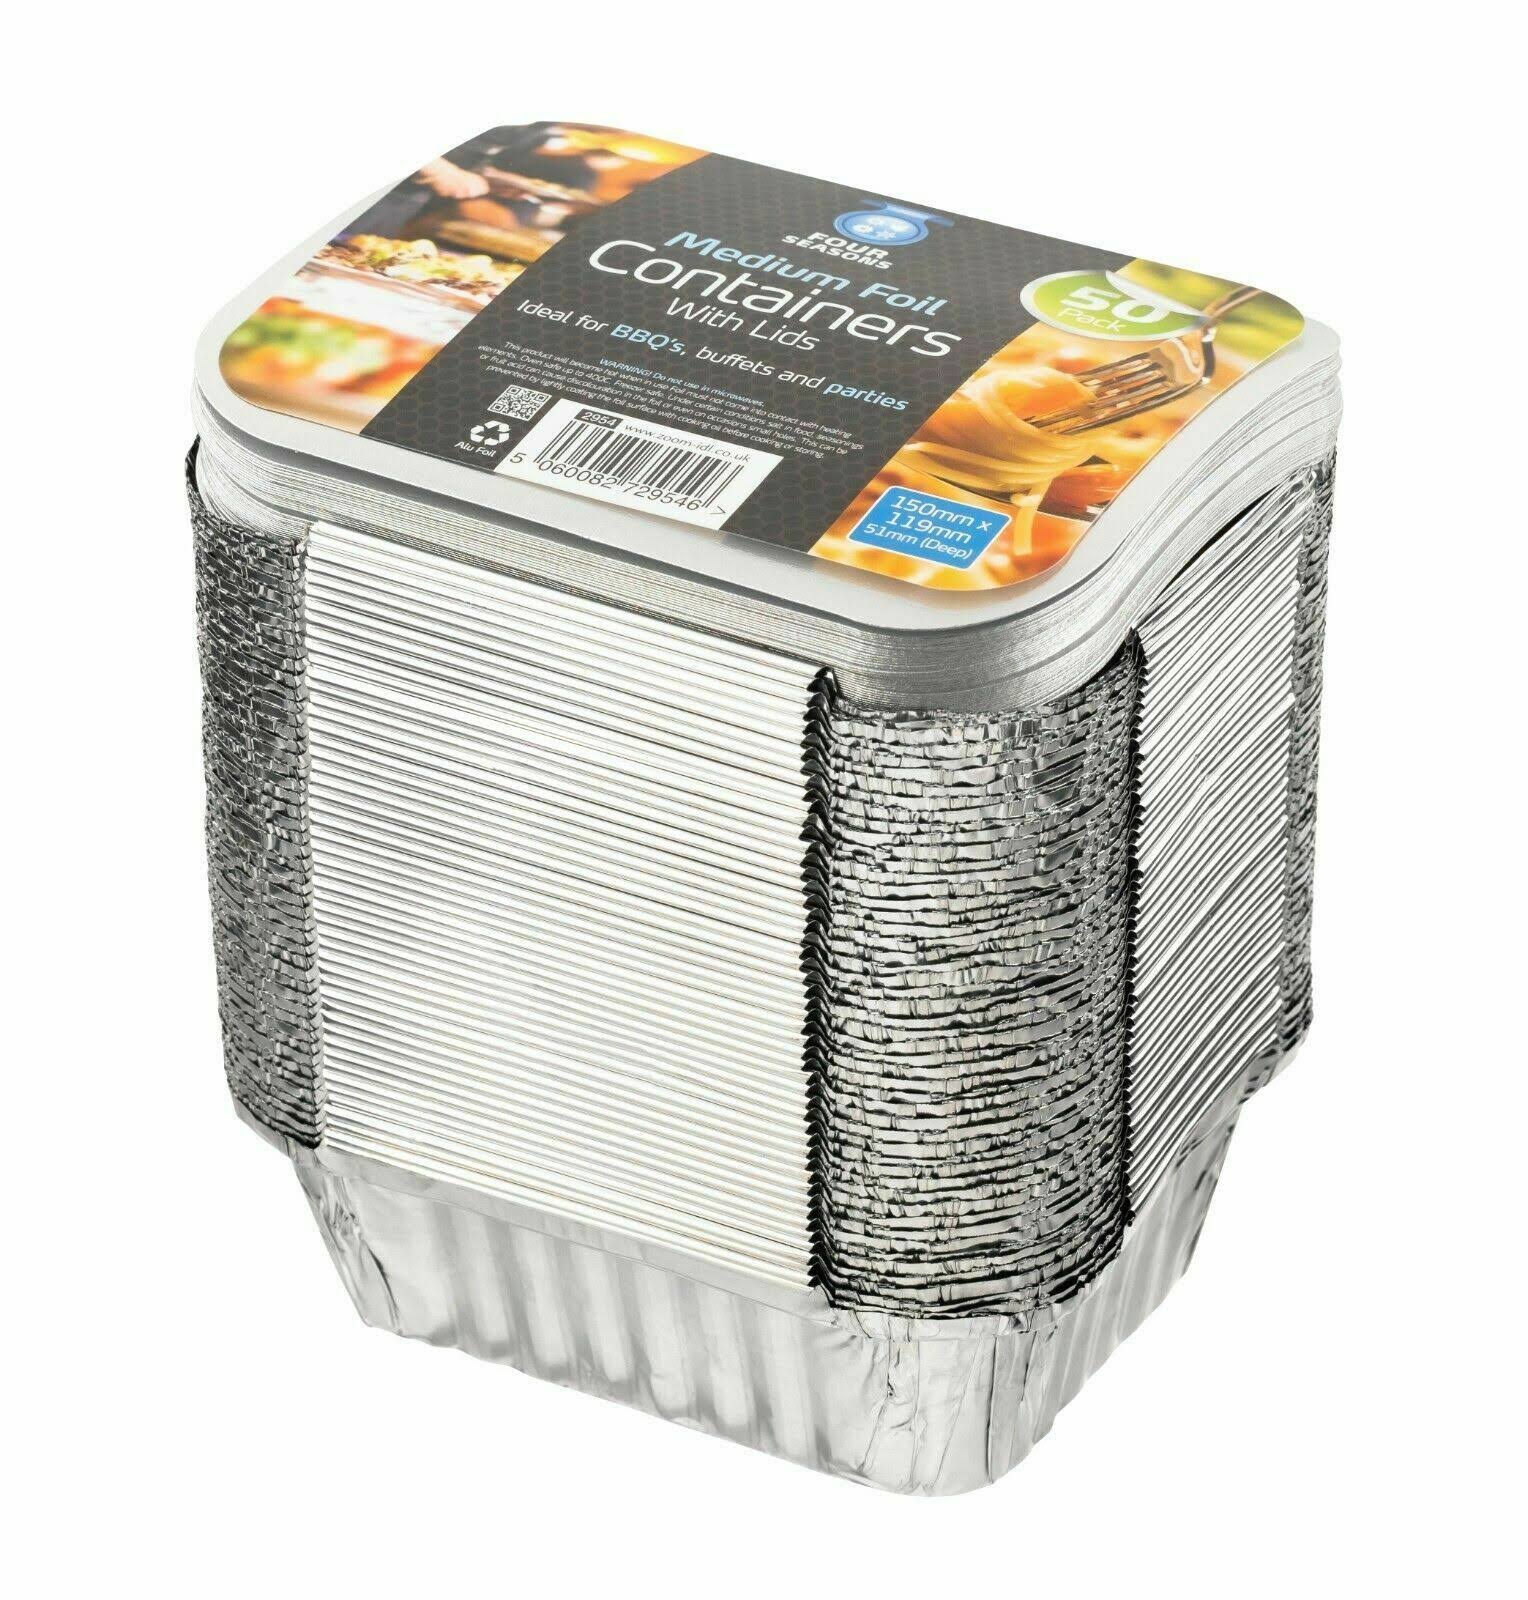 100 x Aluminium Foil Food Containers +Lids No.2 Home Takeaway